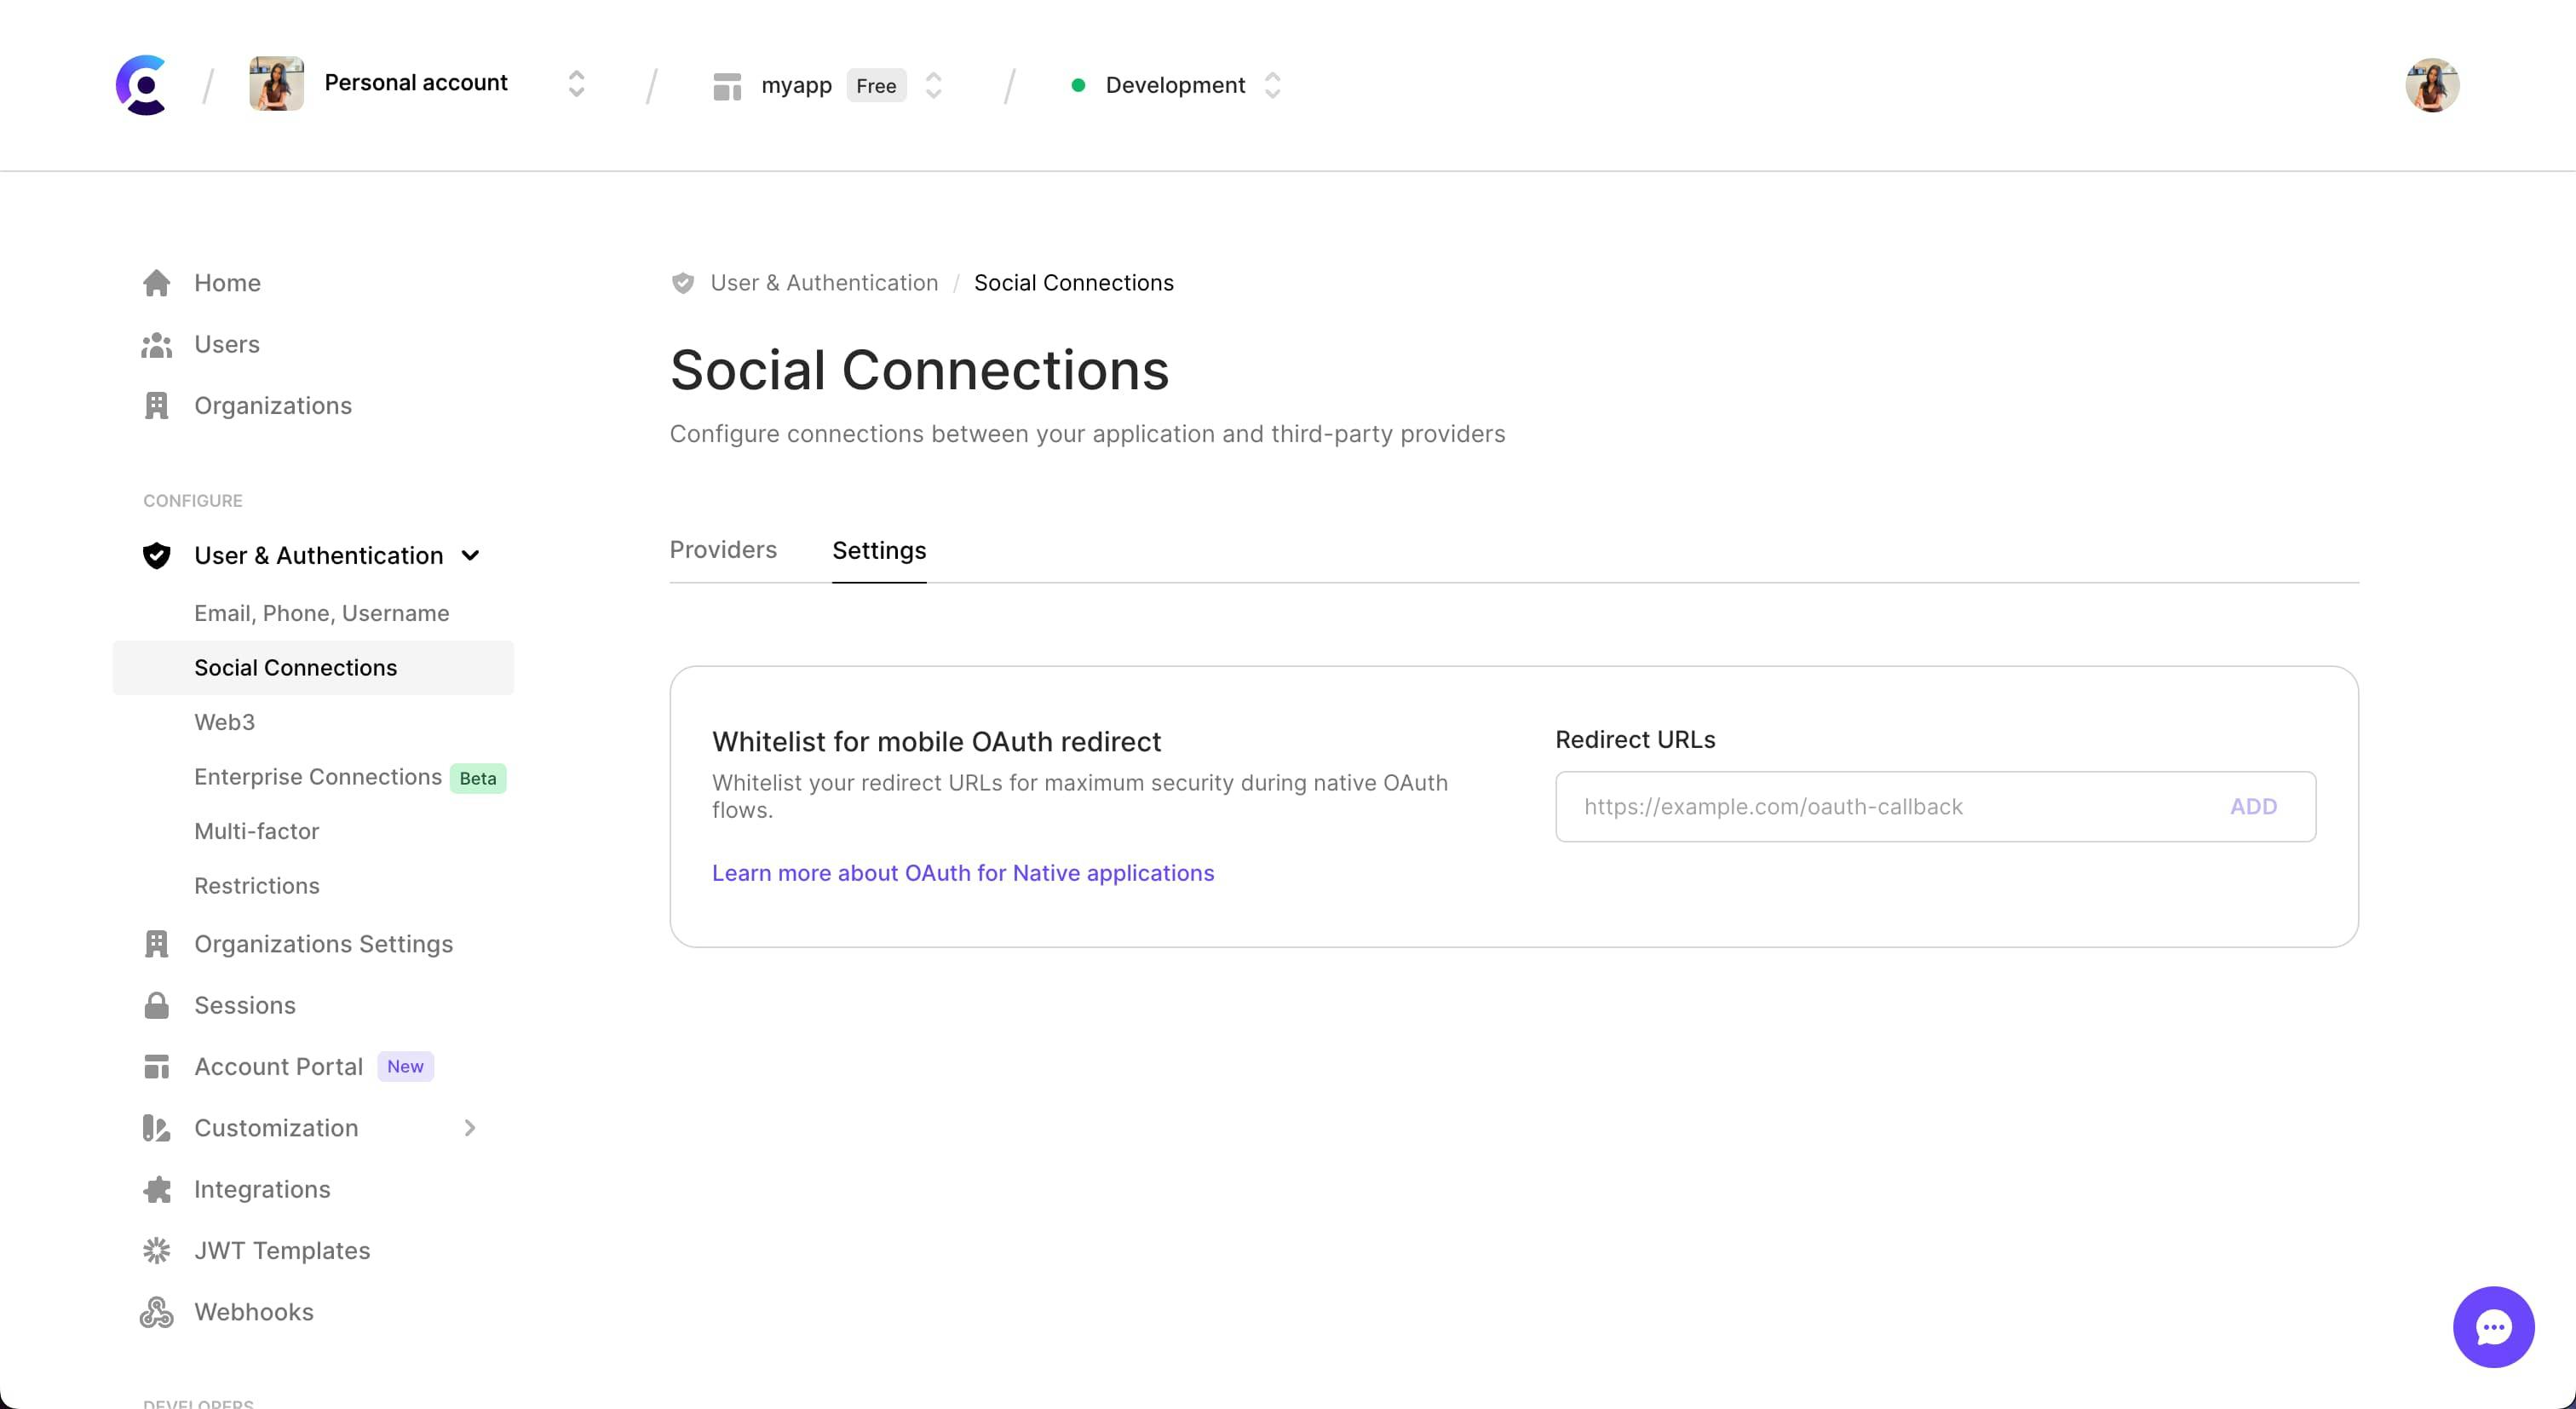 The 'Social Connections' page of the Clerk Dashboard, with the 'Settings' tab selected. The 'Settings' tab shows a section titled 'allowlist for mobile OAuth redirect' and has an input for redirect URLs.